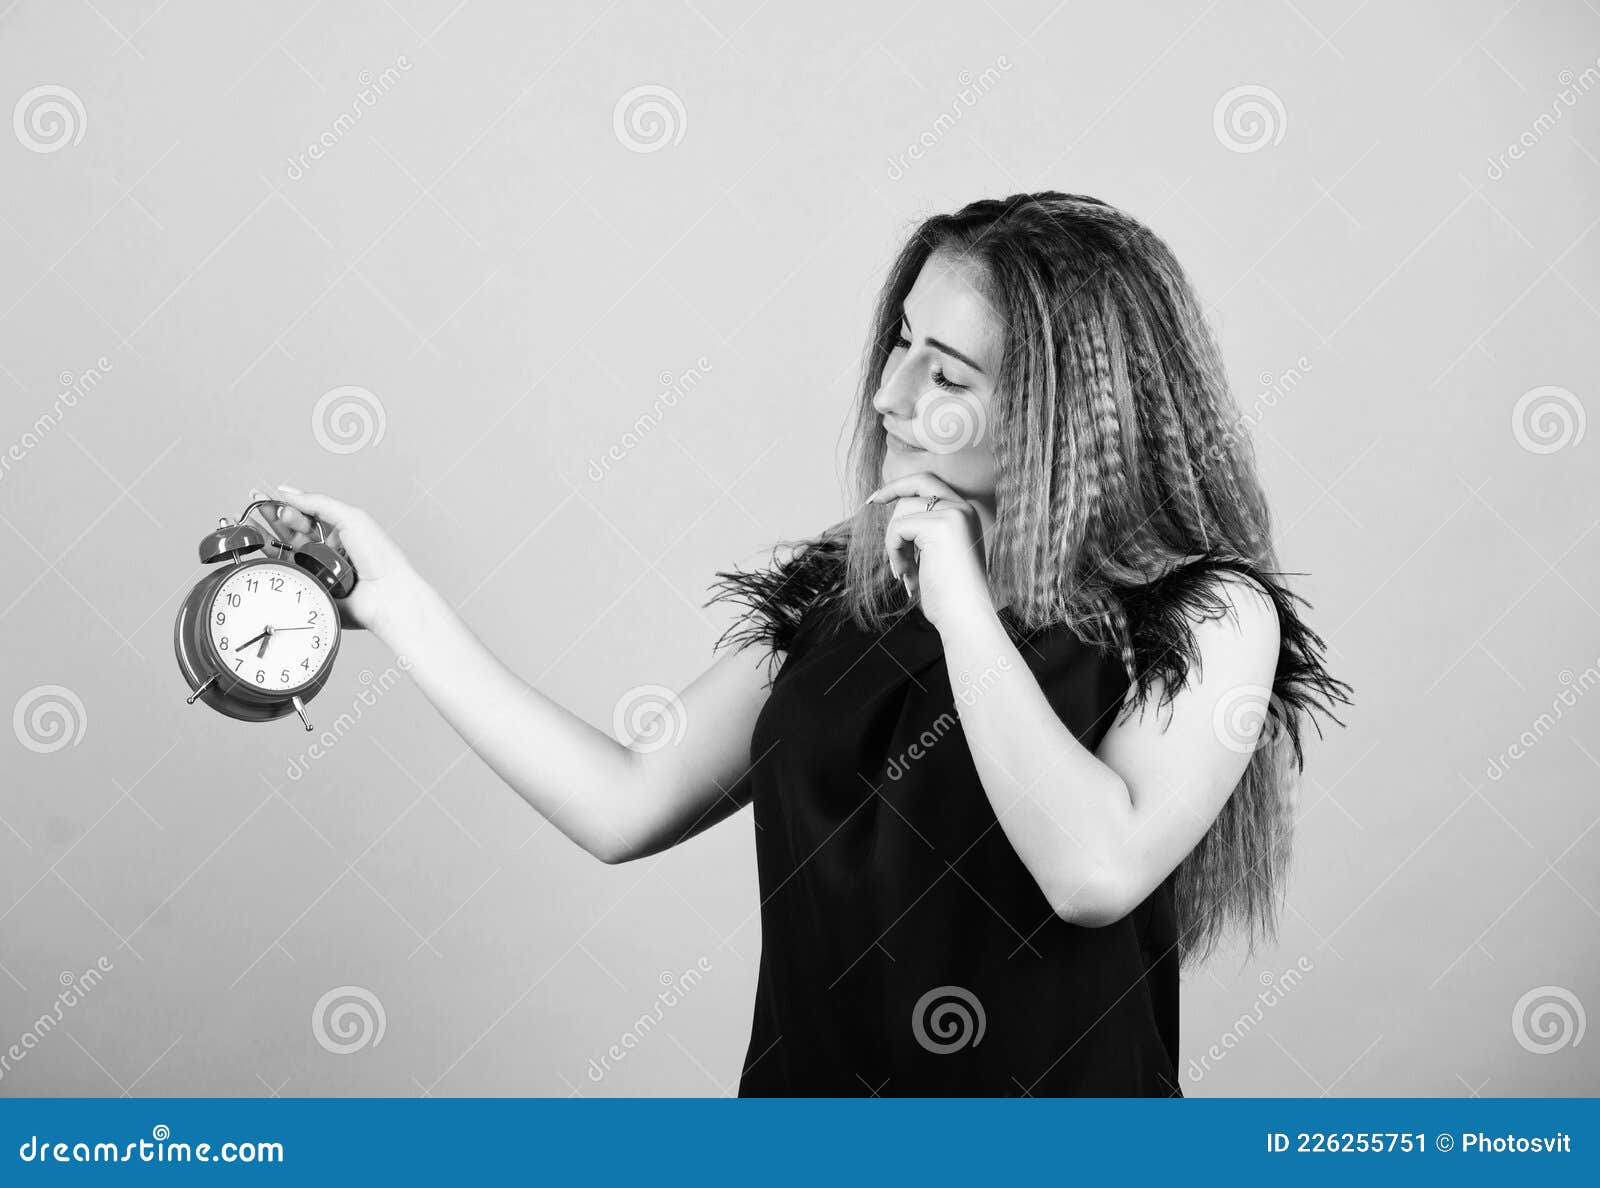 Time and Age Concept. Good Morning. Woman Being Late. Business ...